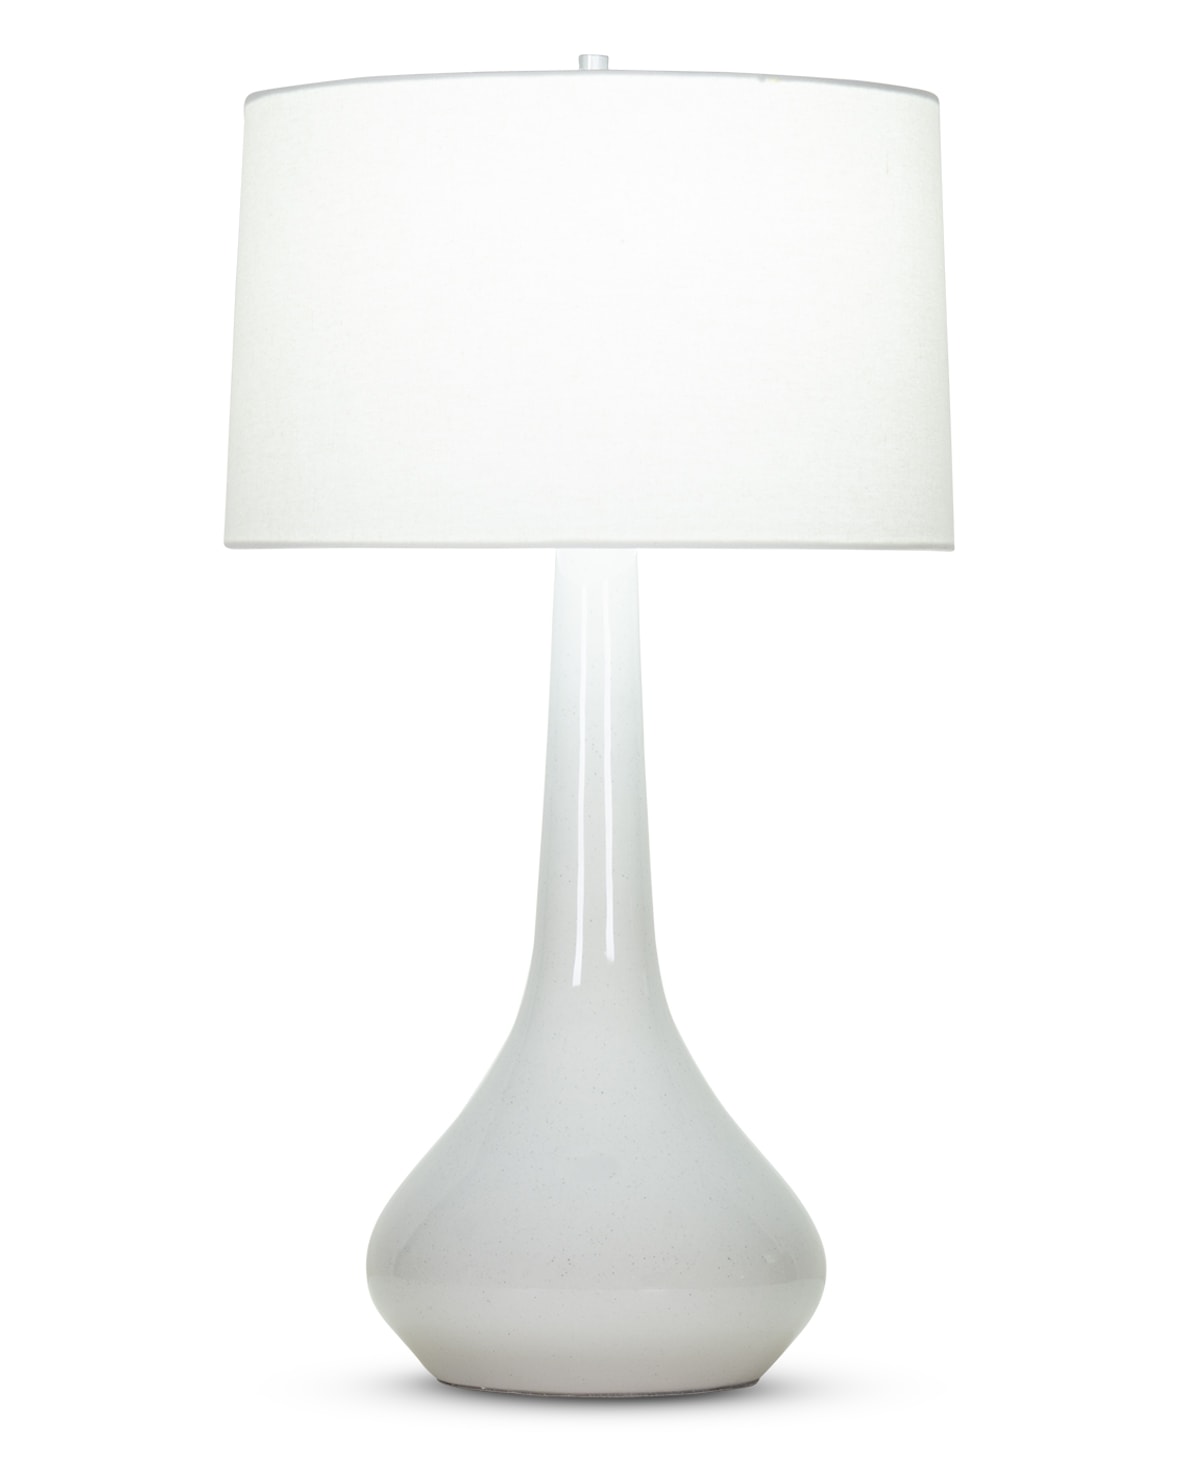 FlowDecor Dinah Table Lamp in ceramic with speckled transparent grey finish and off-white linen tapered drum shade (# 4083)